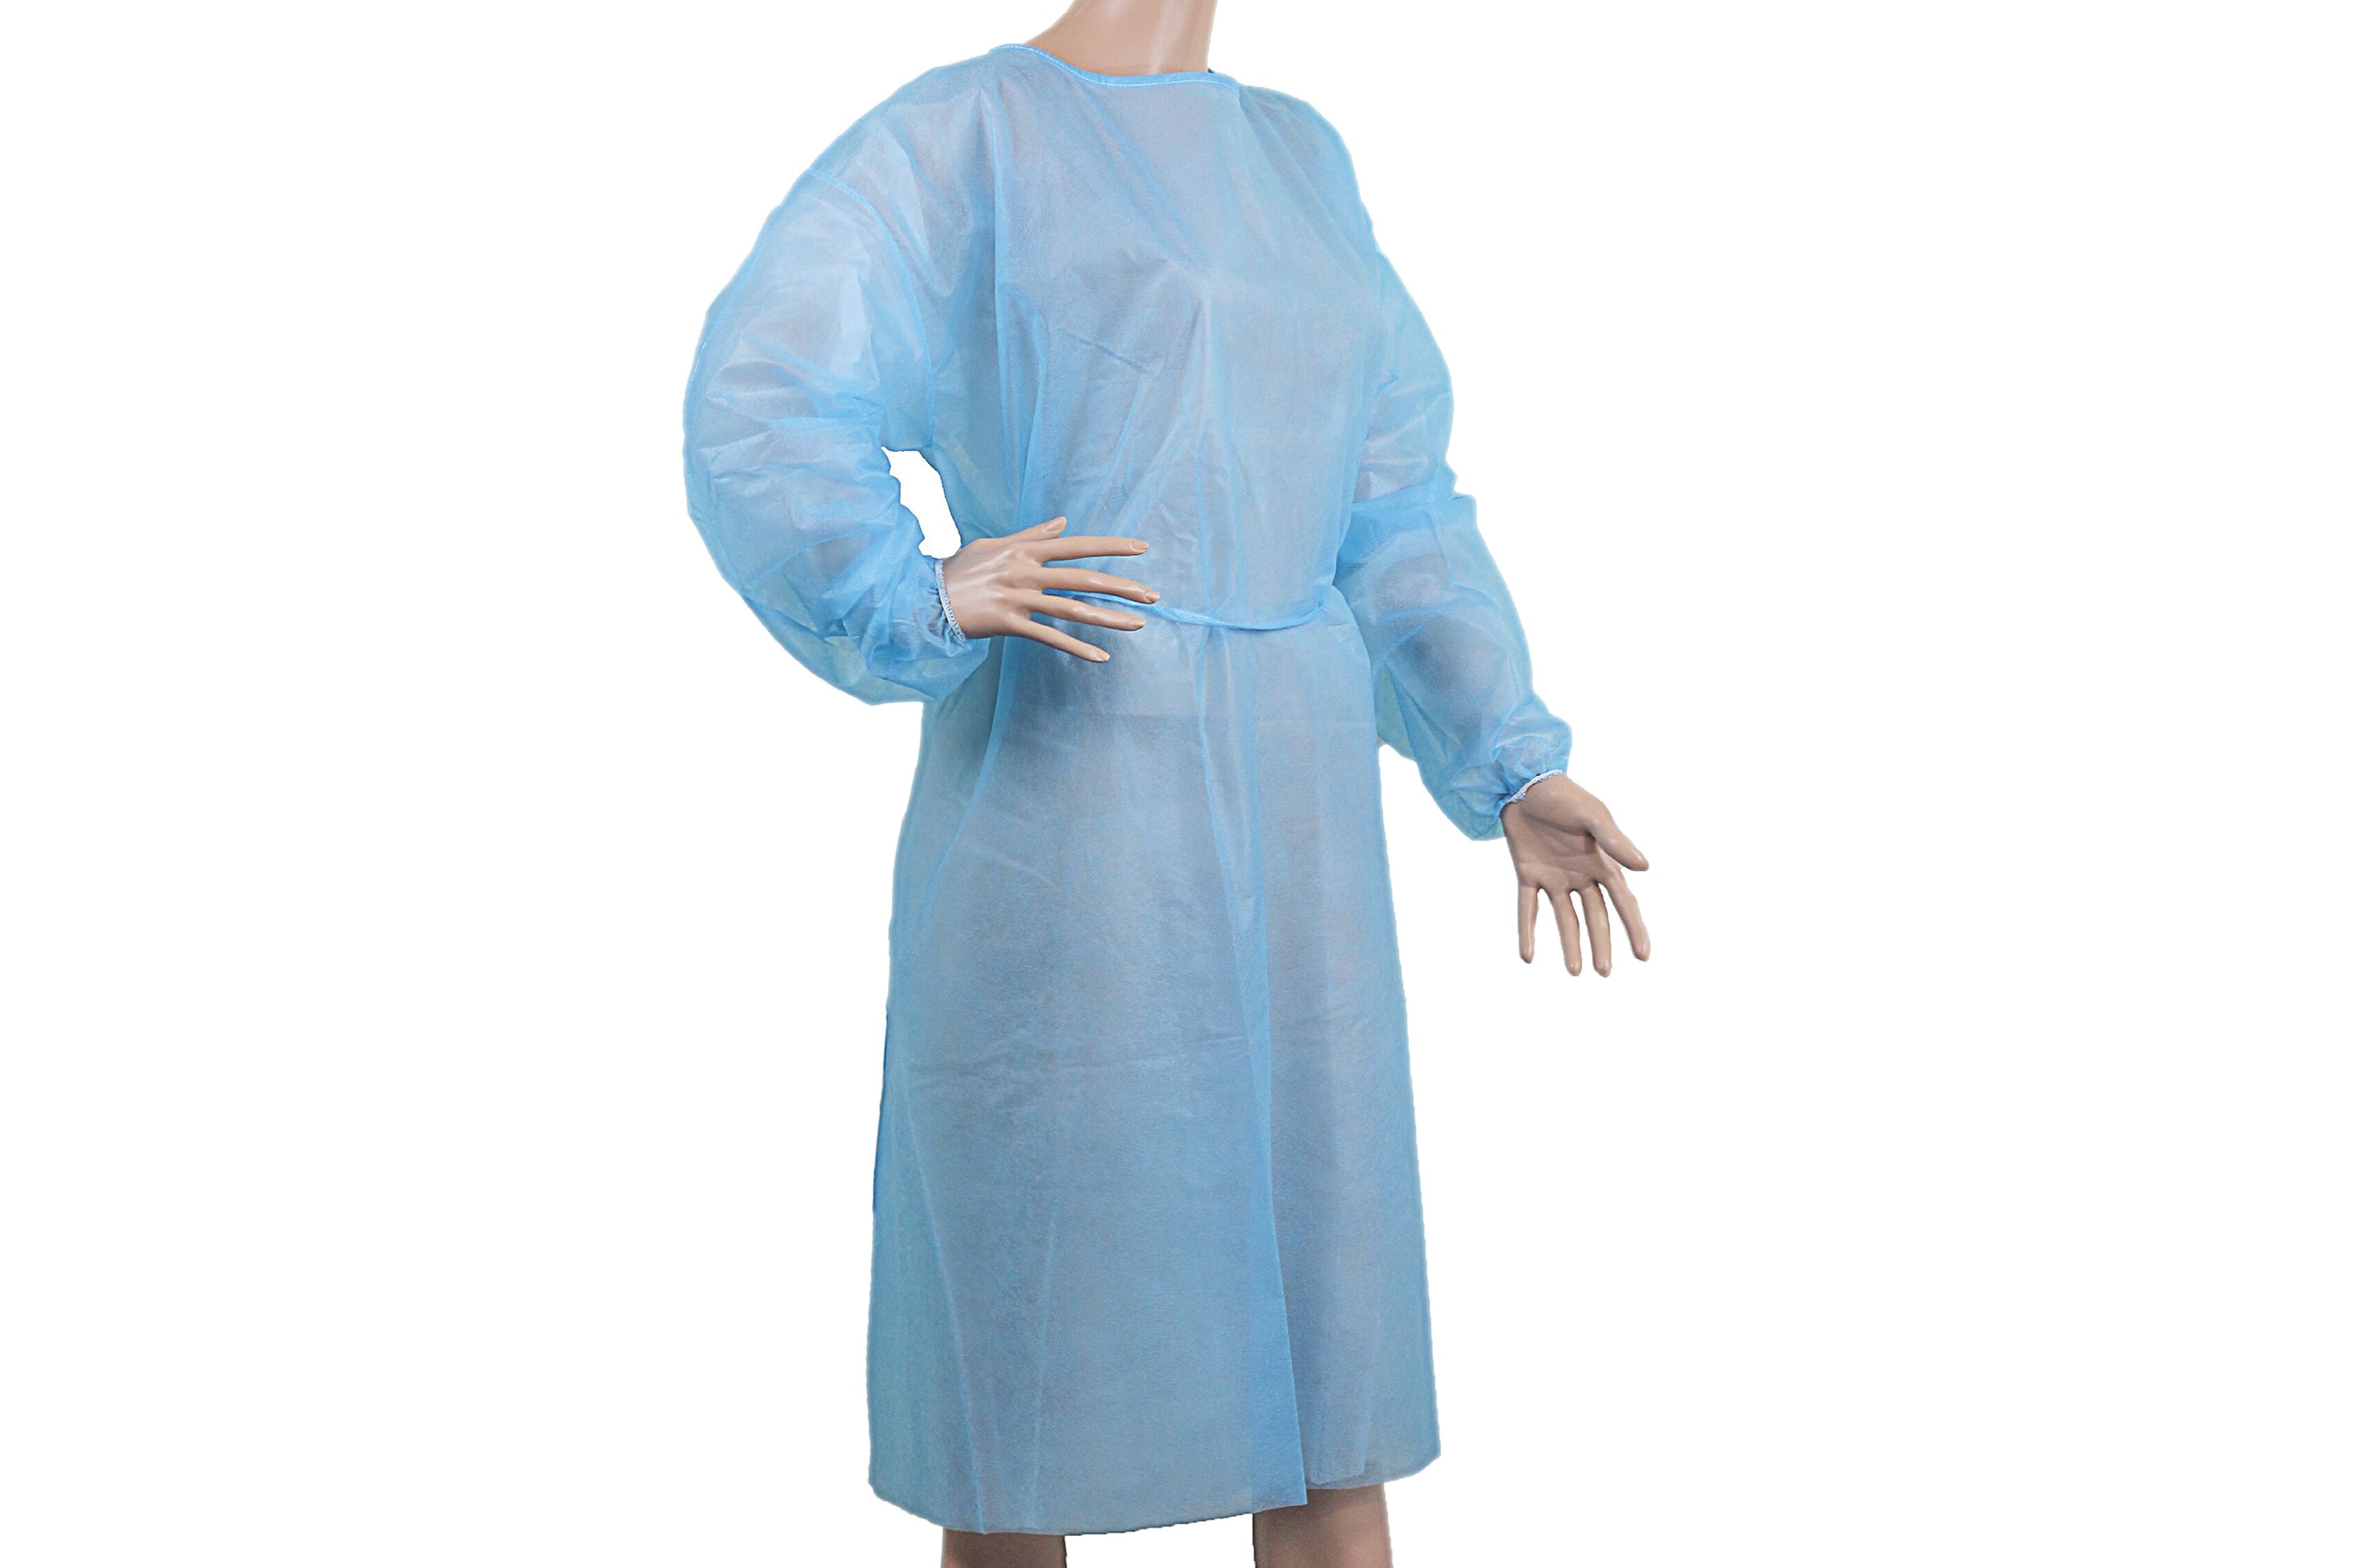 Dealmed | Infection Control & PPE-Isolation Gowns